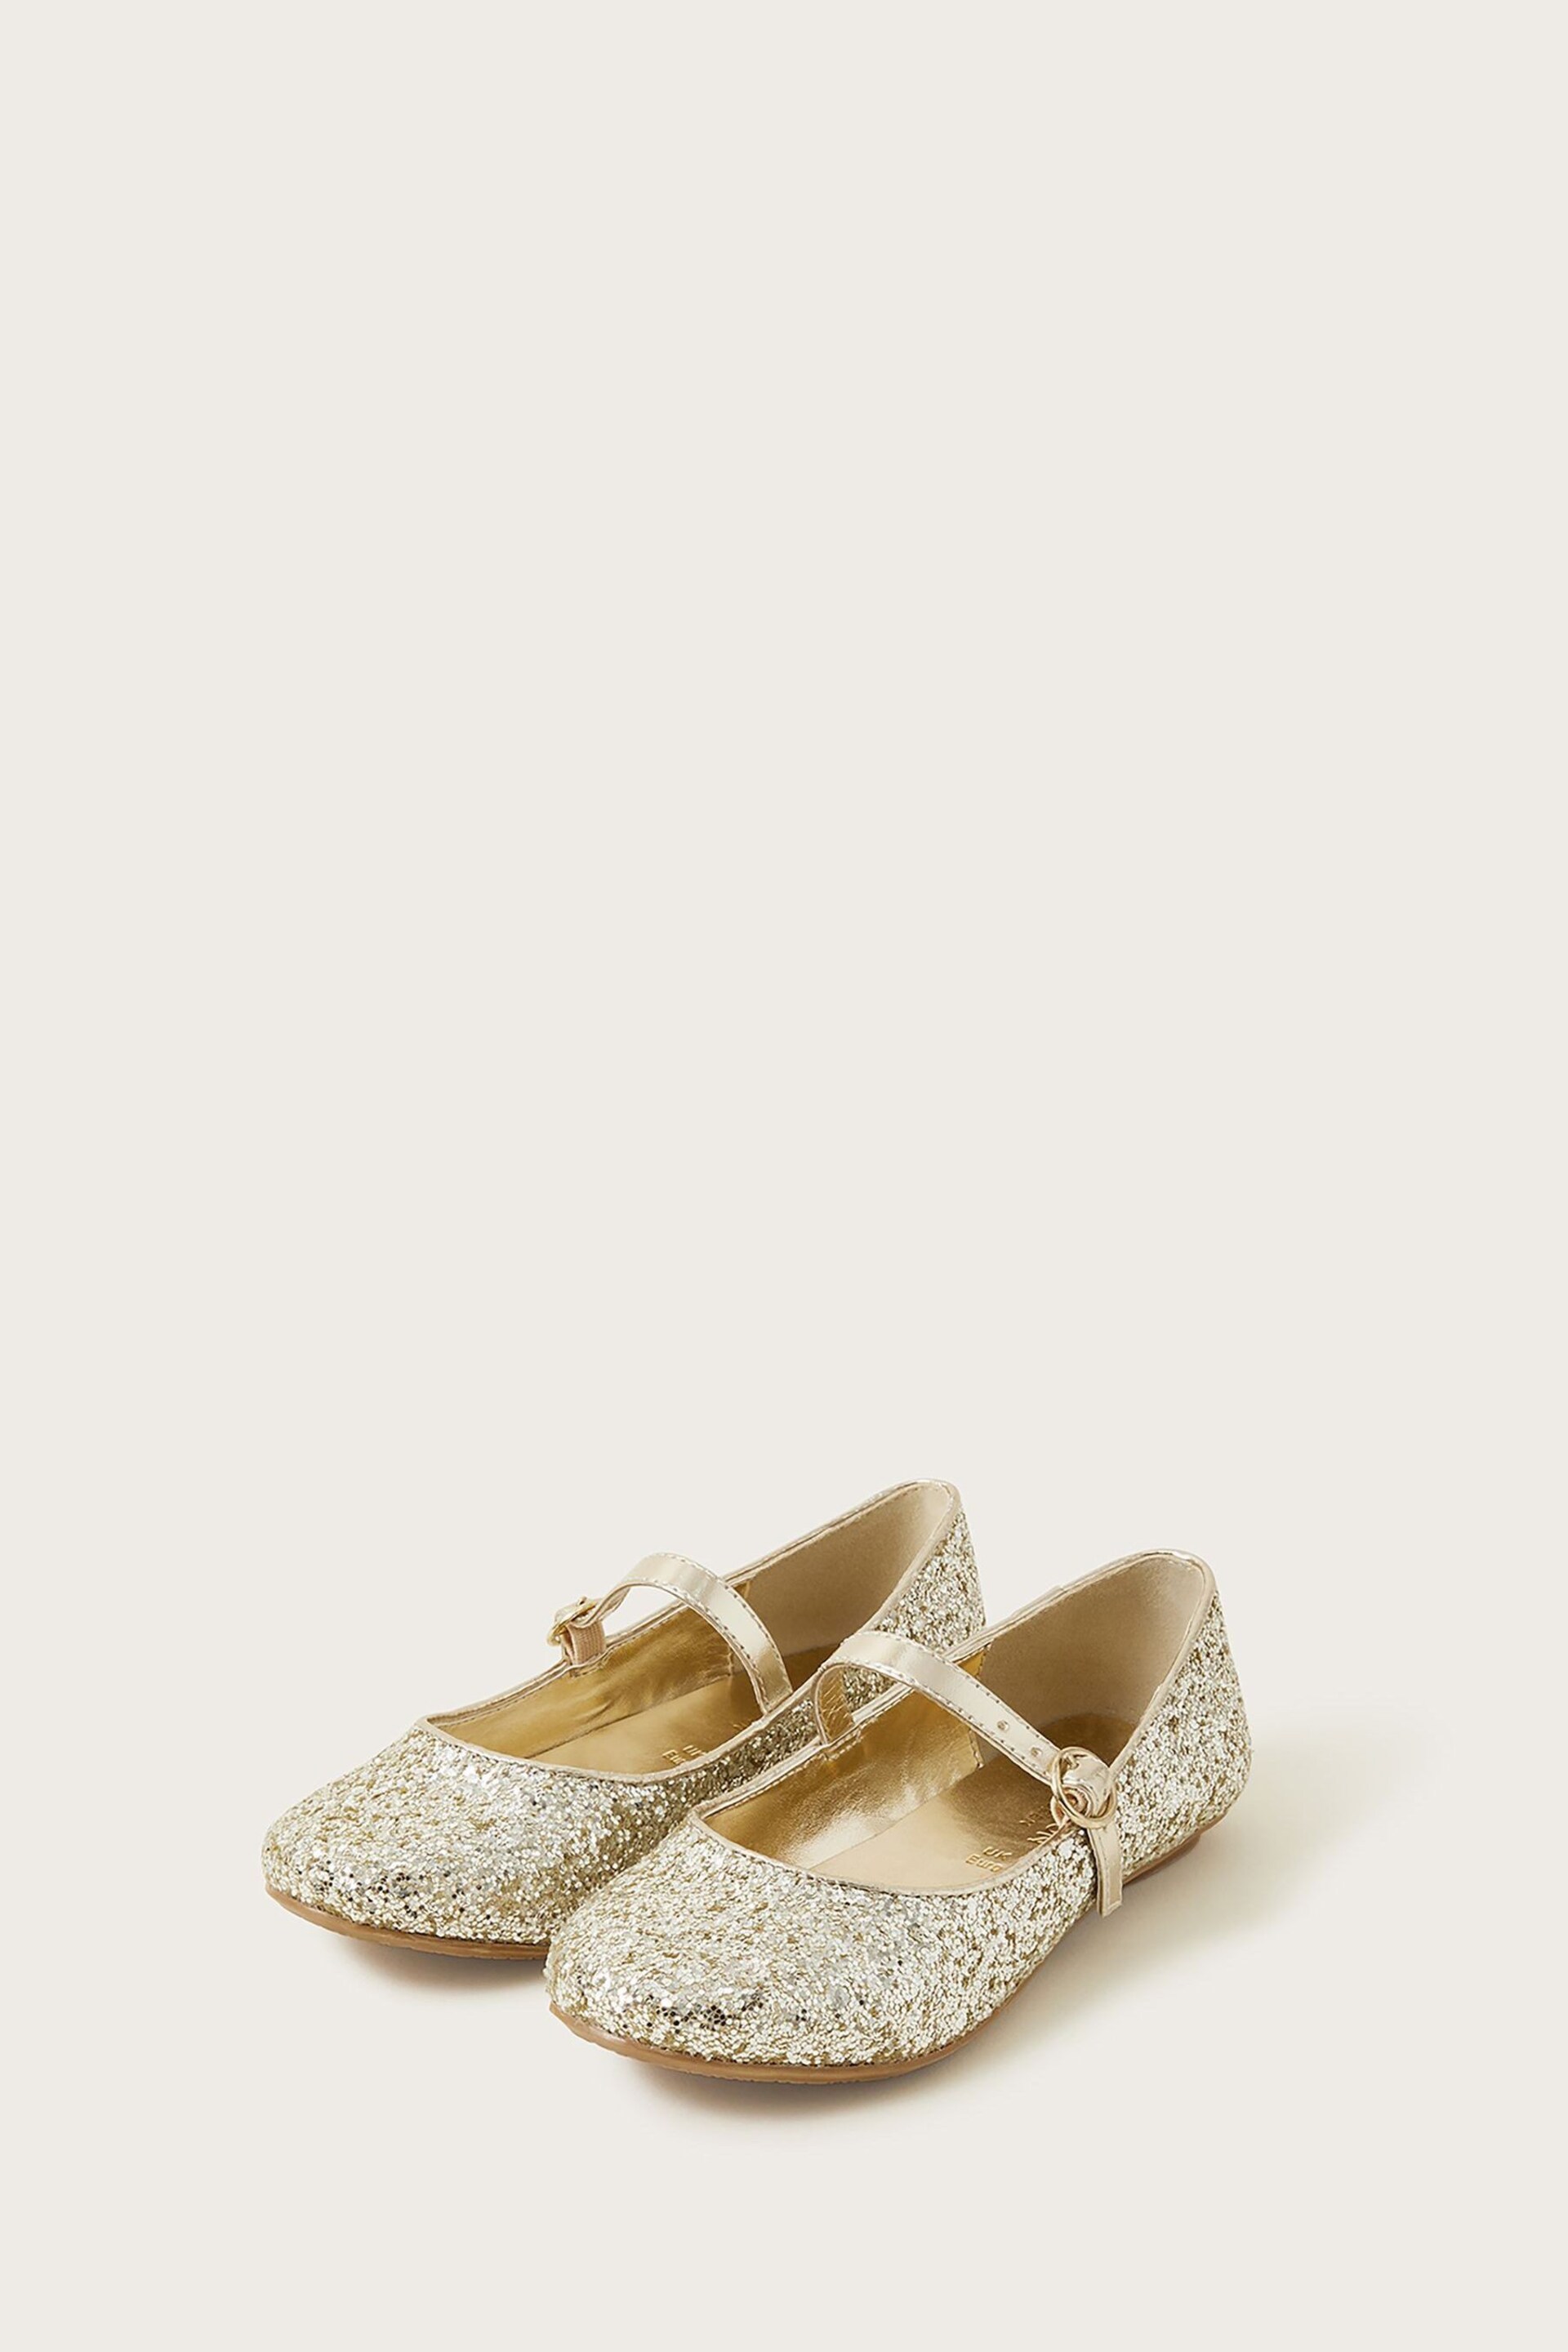 Monsoon Gold Stardust Ballerina Shoes - Image 3 of 4